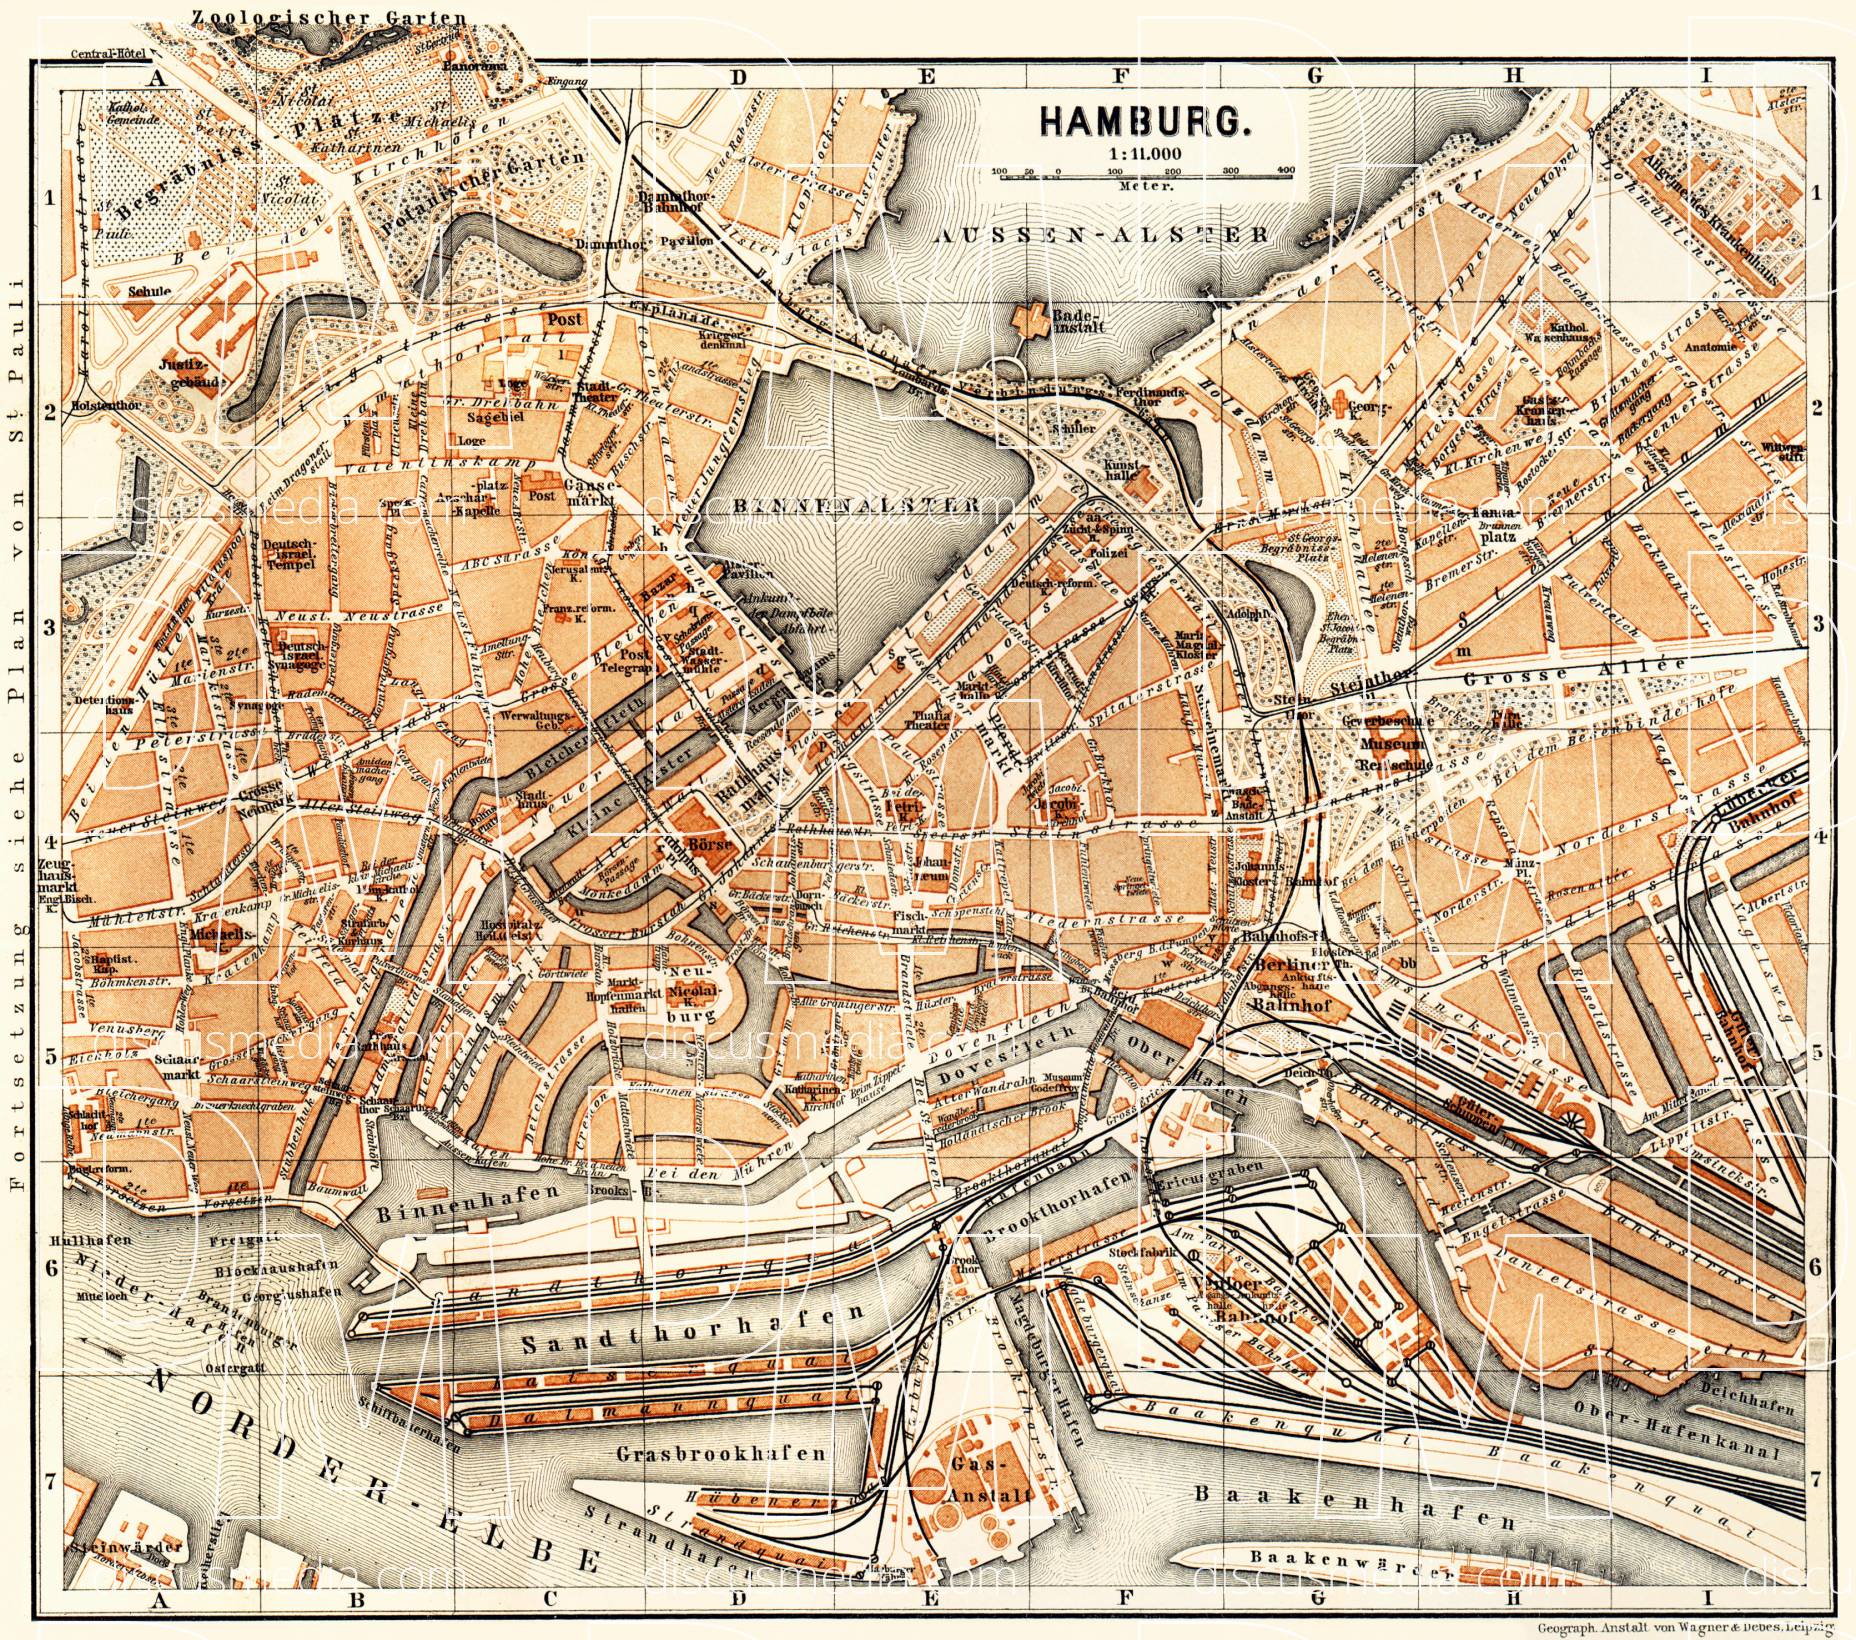 Old map of Hamburg in 1887. Buy vintage map replica poster print or